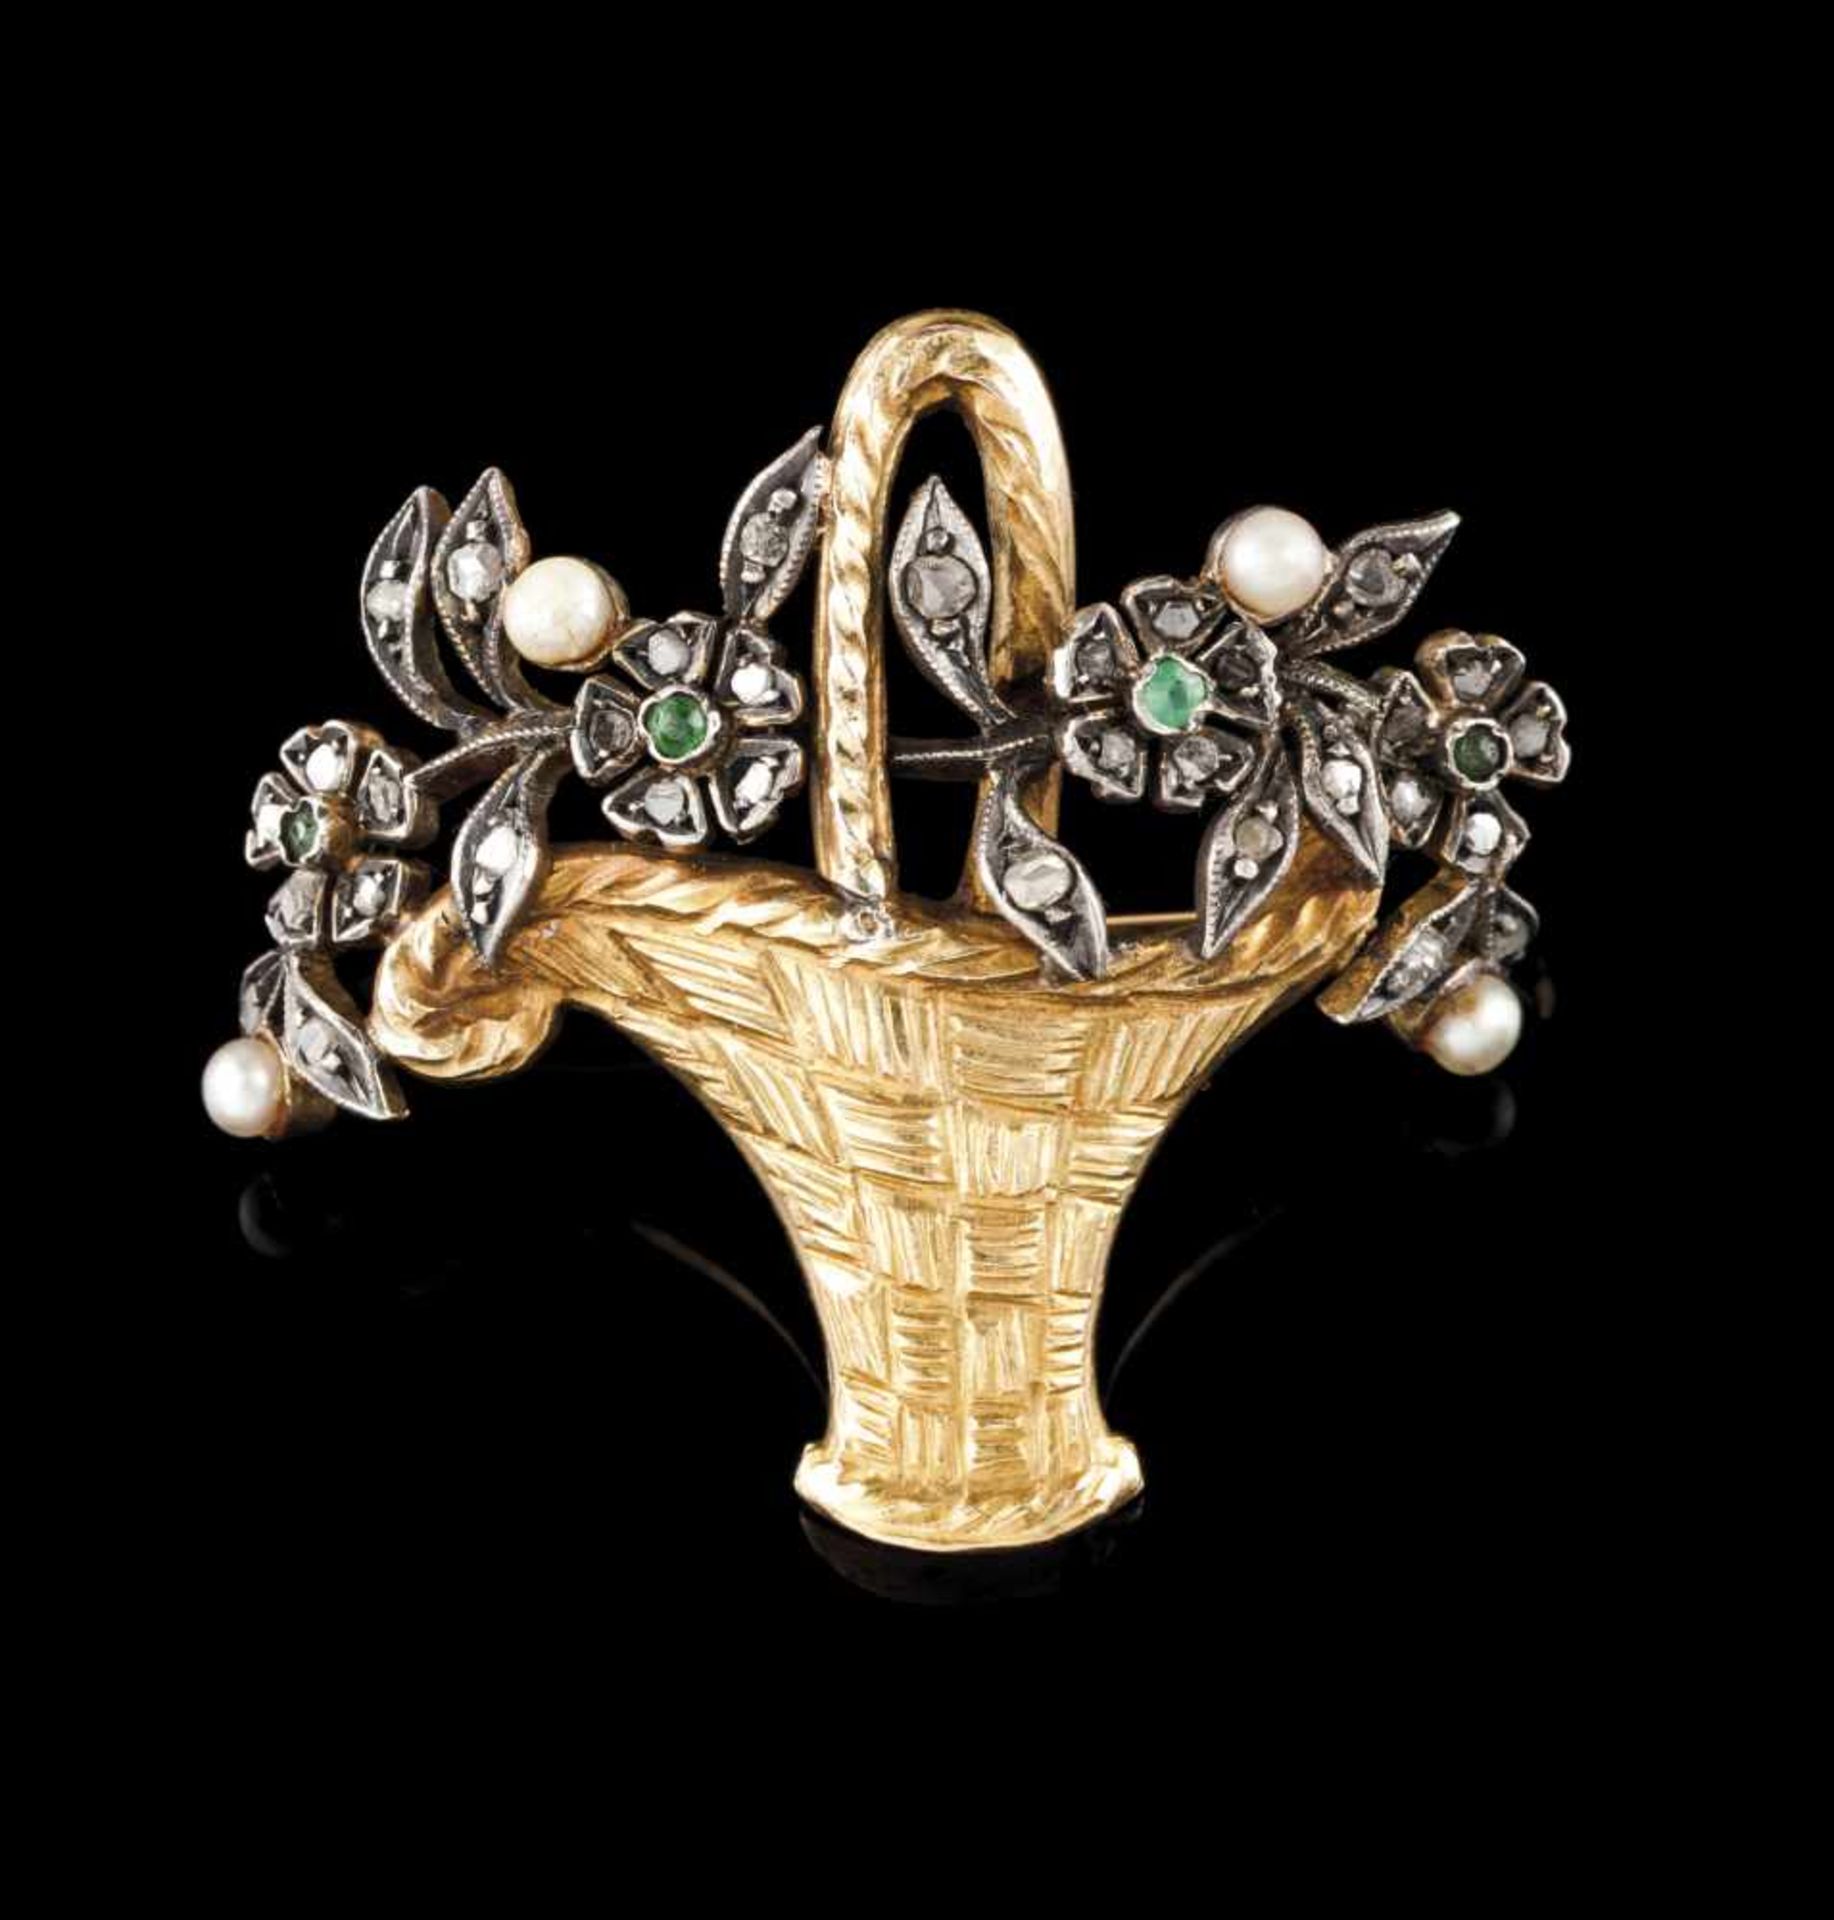 A broochGold and silver set with small pearls, emeralds and rose cut diamondsDesigned as a